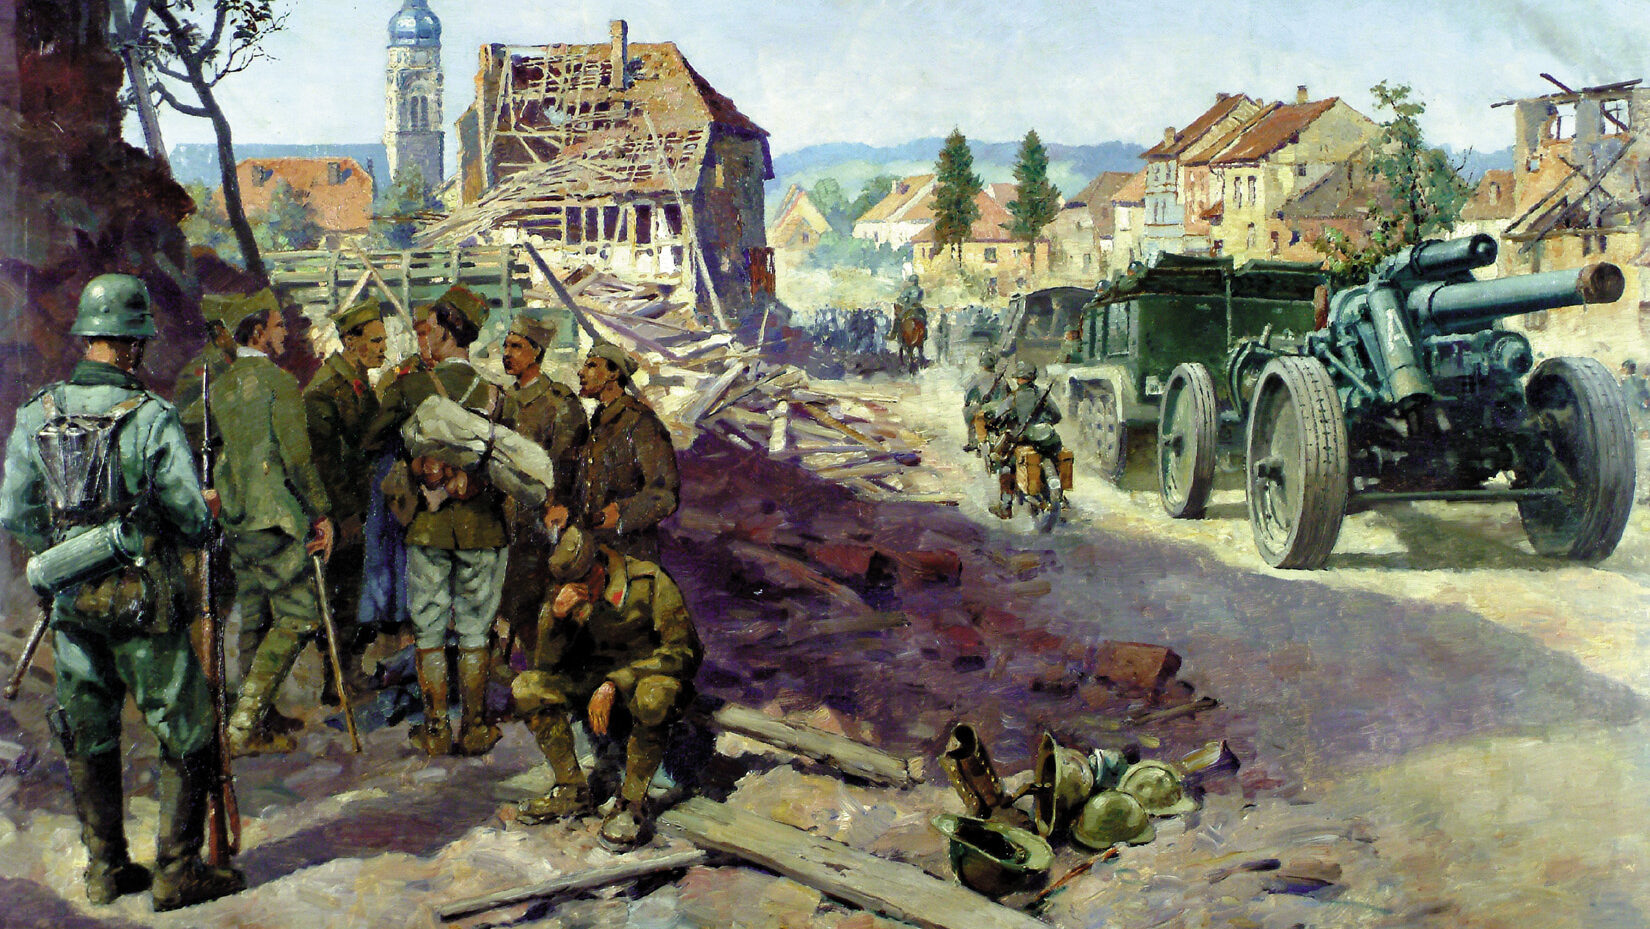 Russians are guarded by their German captors in this German WWII painting. Captured Russian General Andrei Vlasov, disillusioned with Stalin’s Bolshevik politics, was given command of a German army made up of captured Russian soldiers.